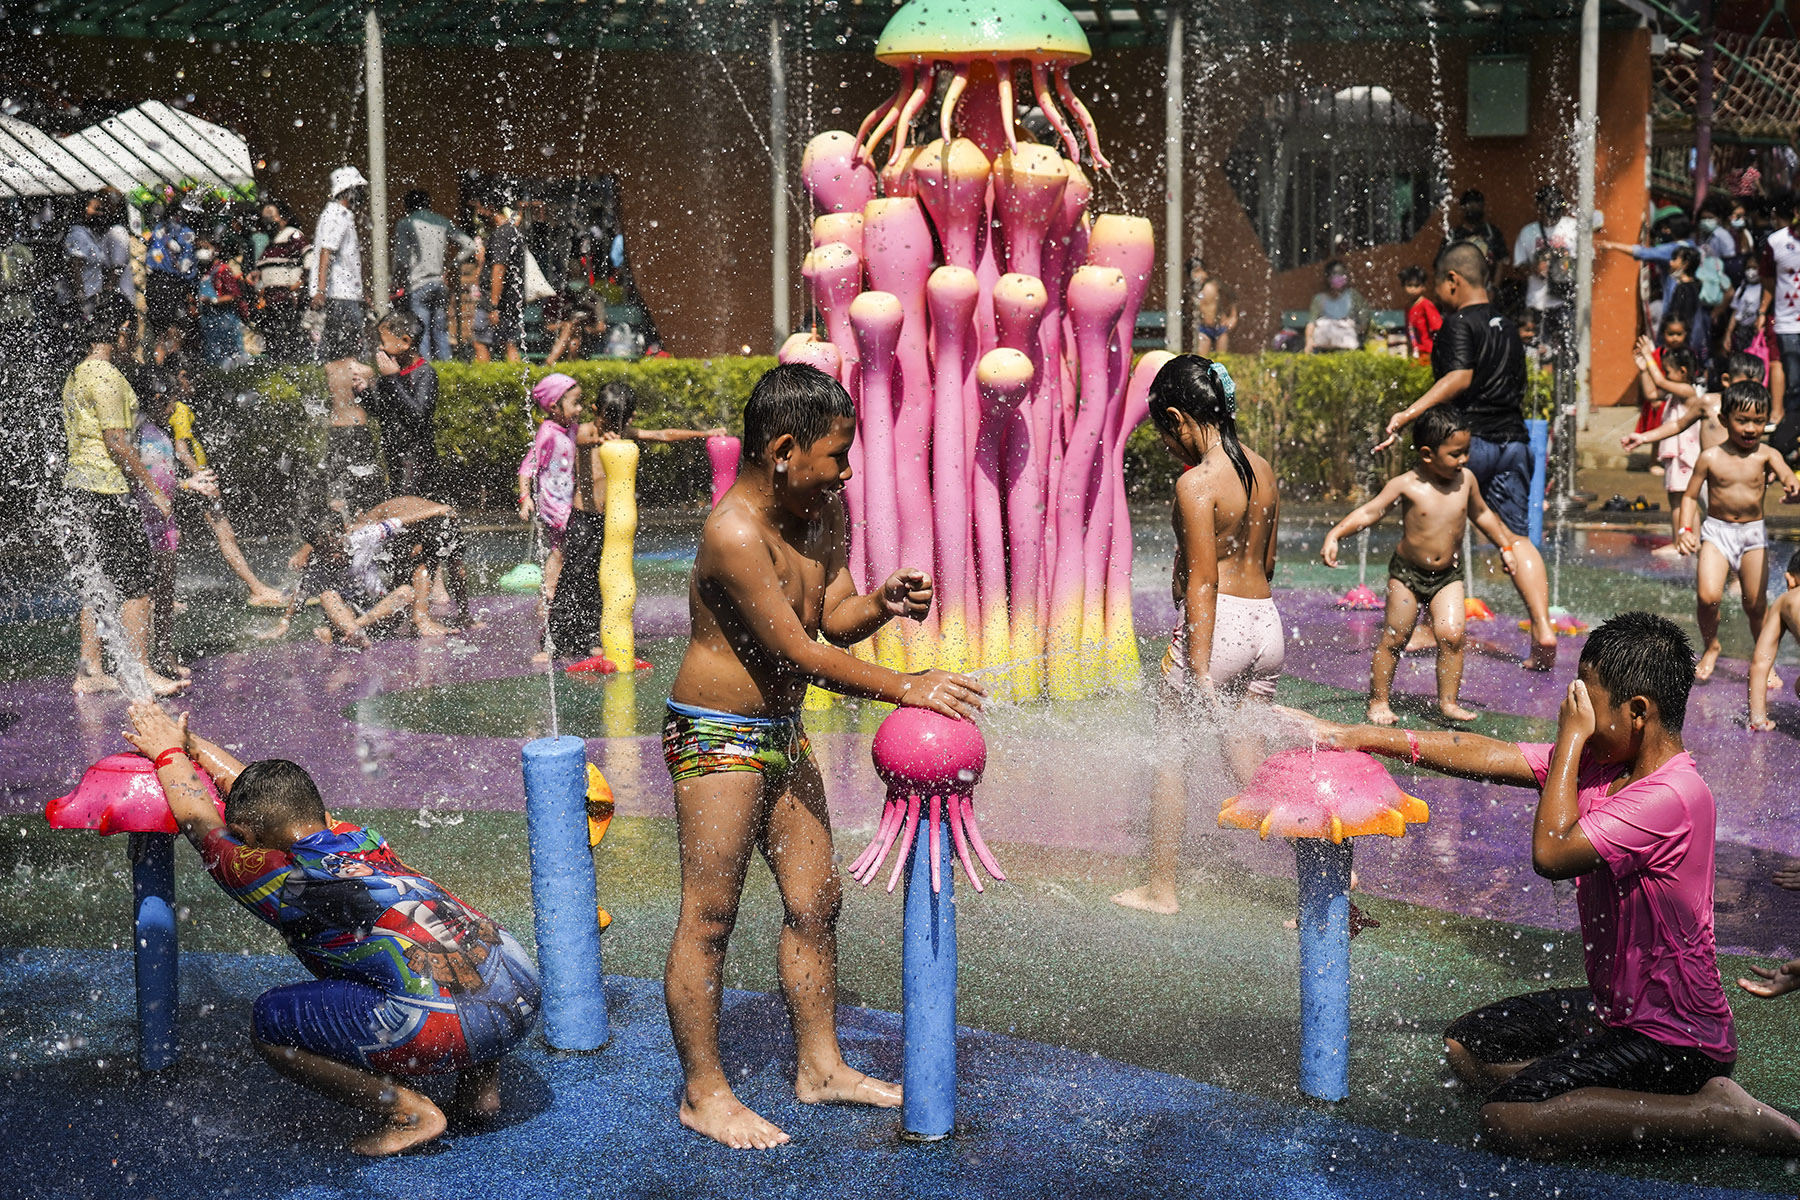 Children play in the water during the National Children's Day event inside children's museum in Bangkok, Thailand.